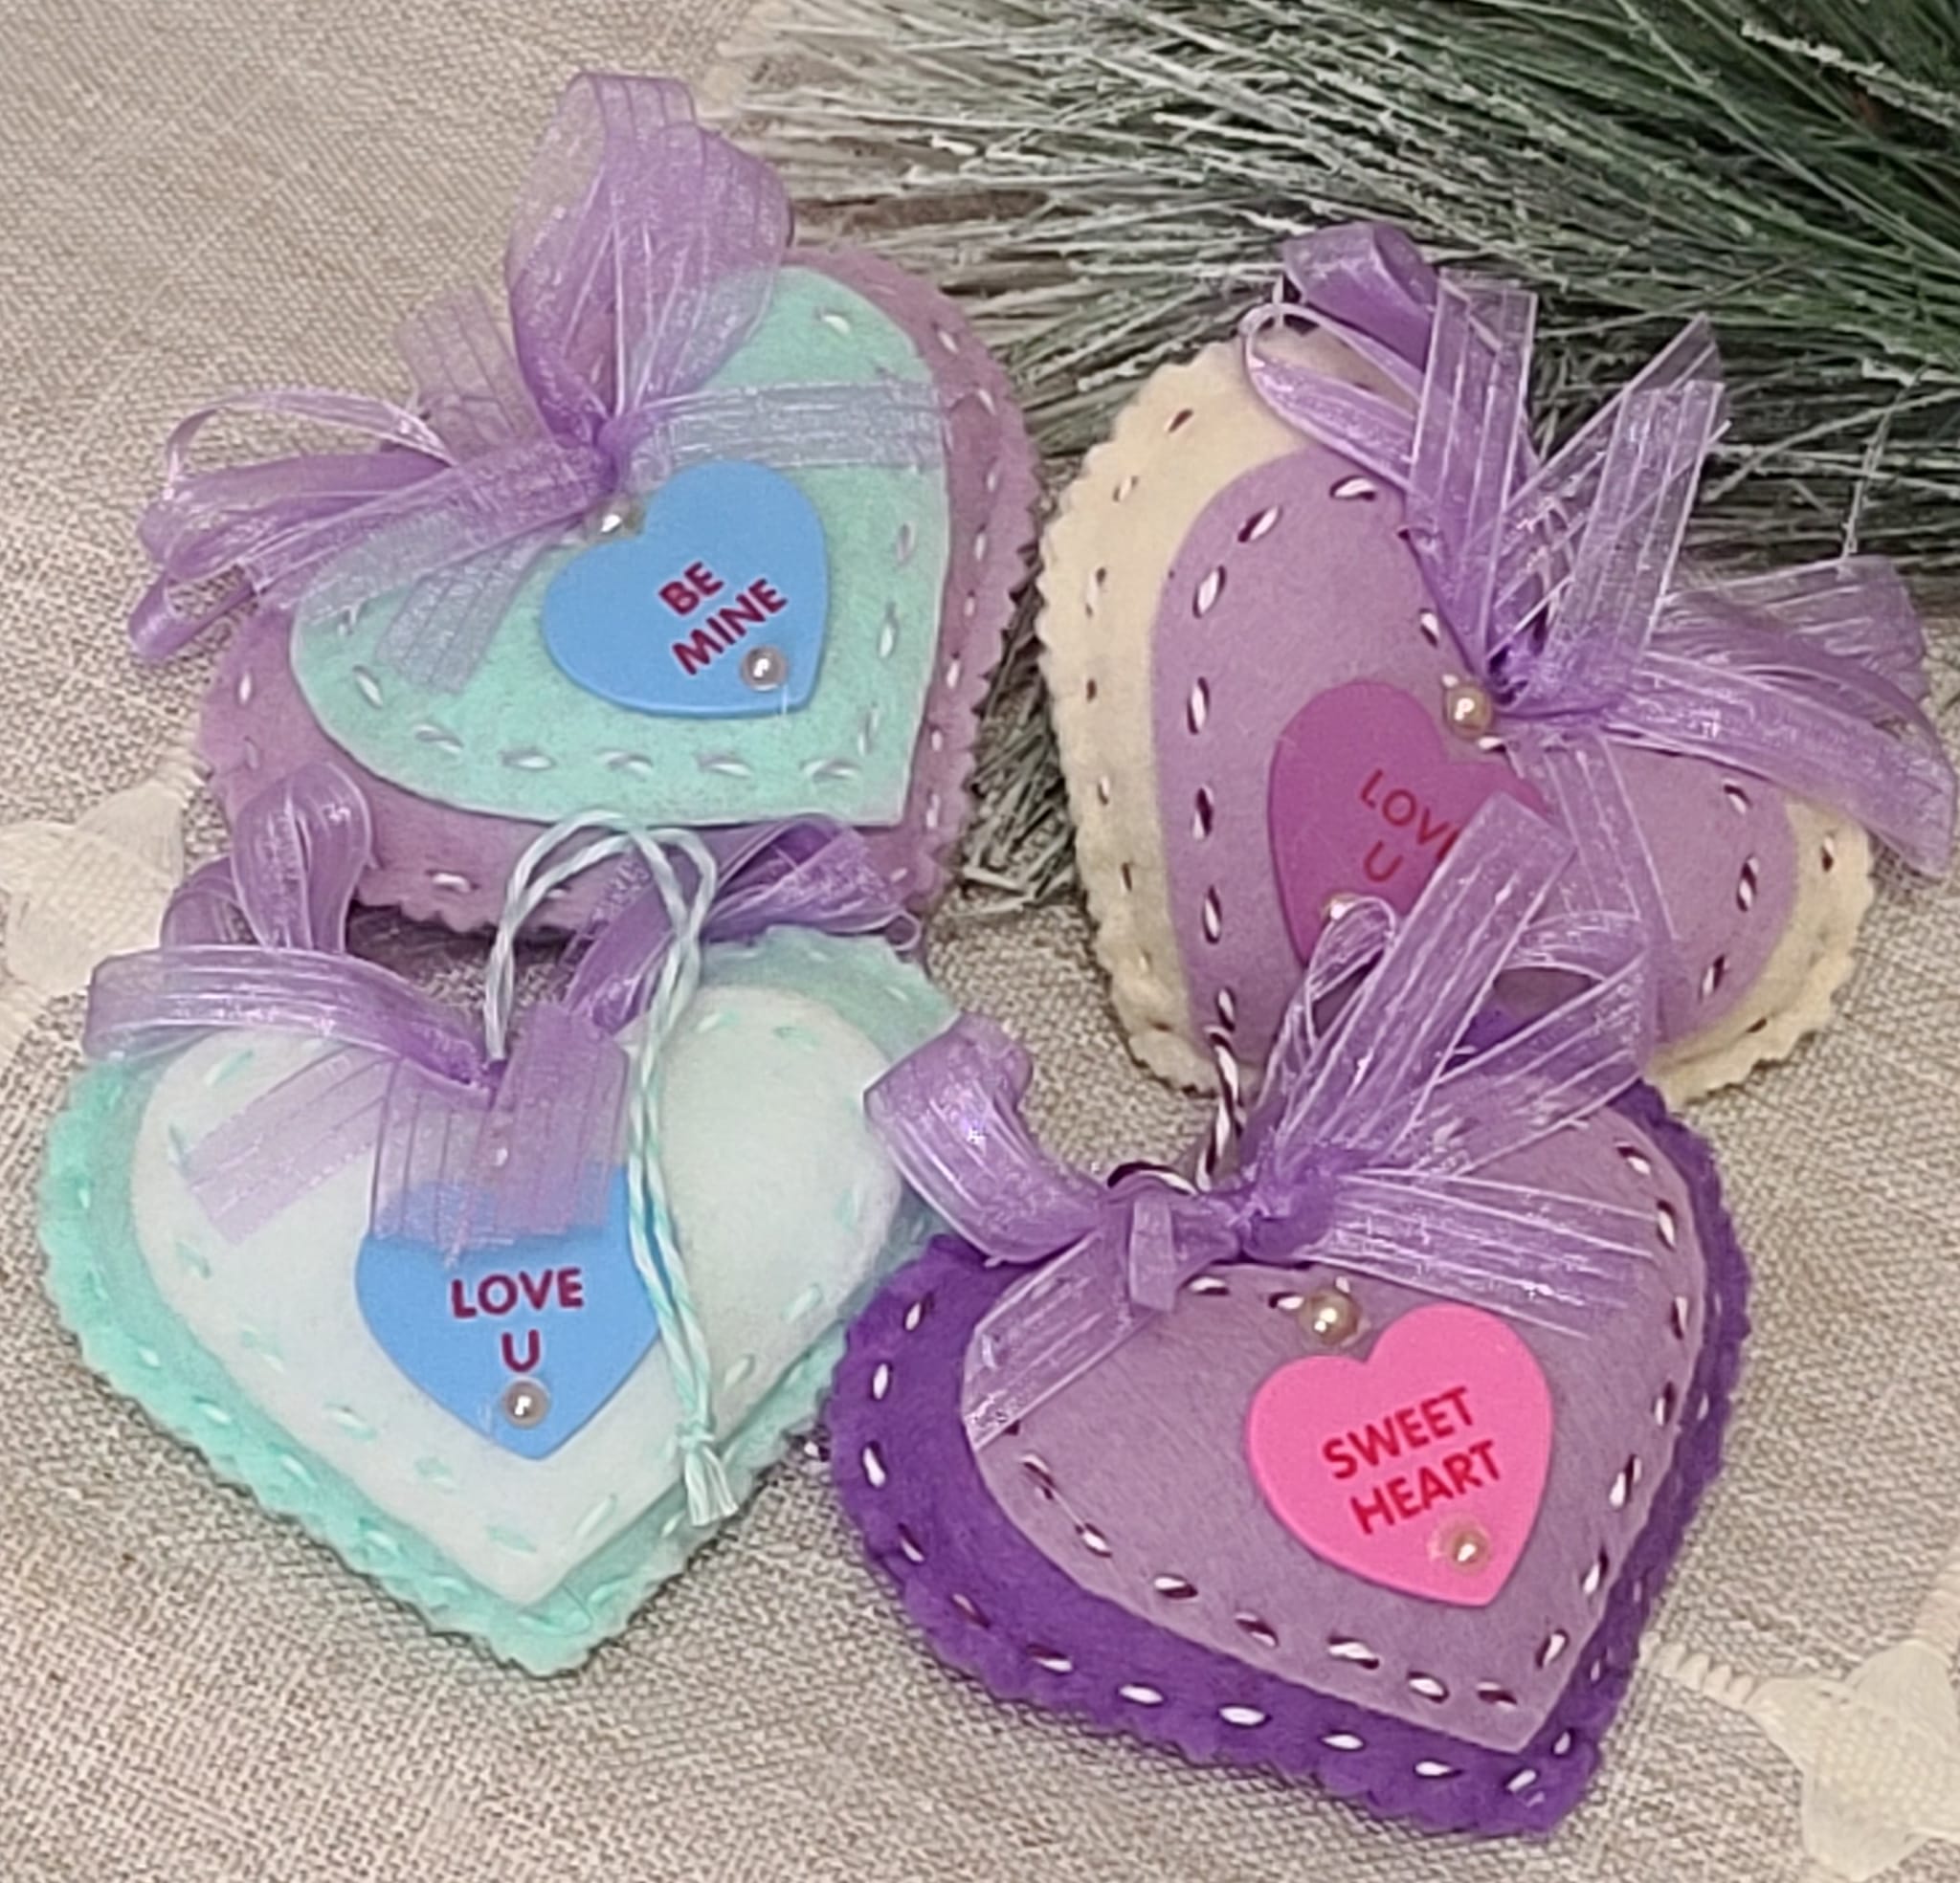 Sweet heart candy heart felt ornaments set of 4 valentine PURPLE - Click Image to Close